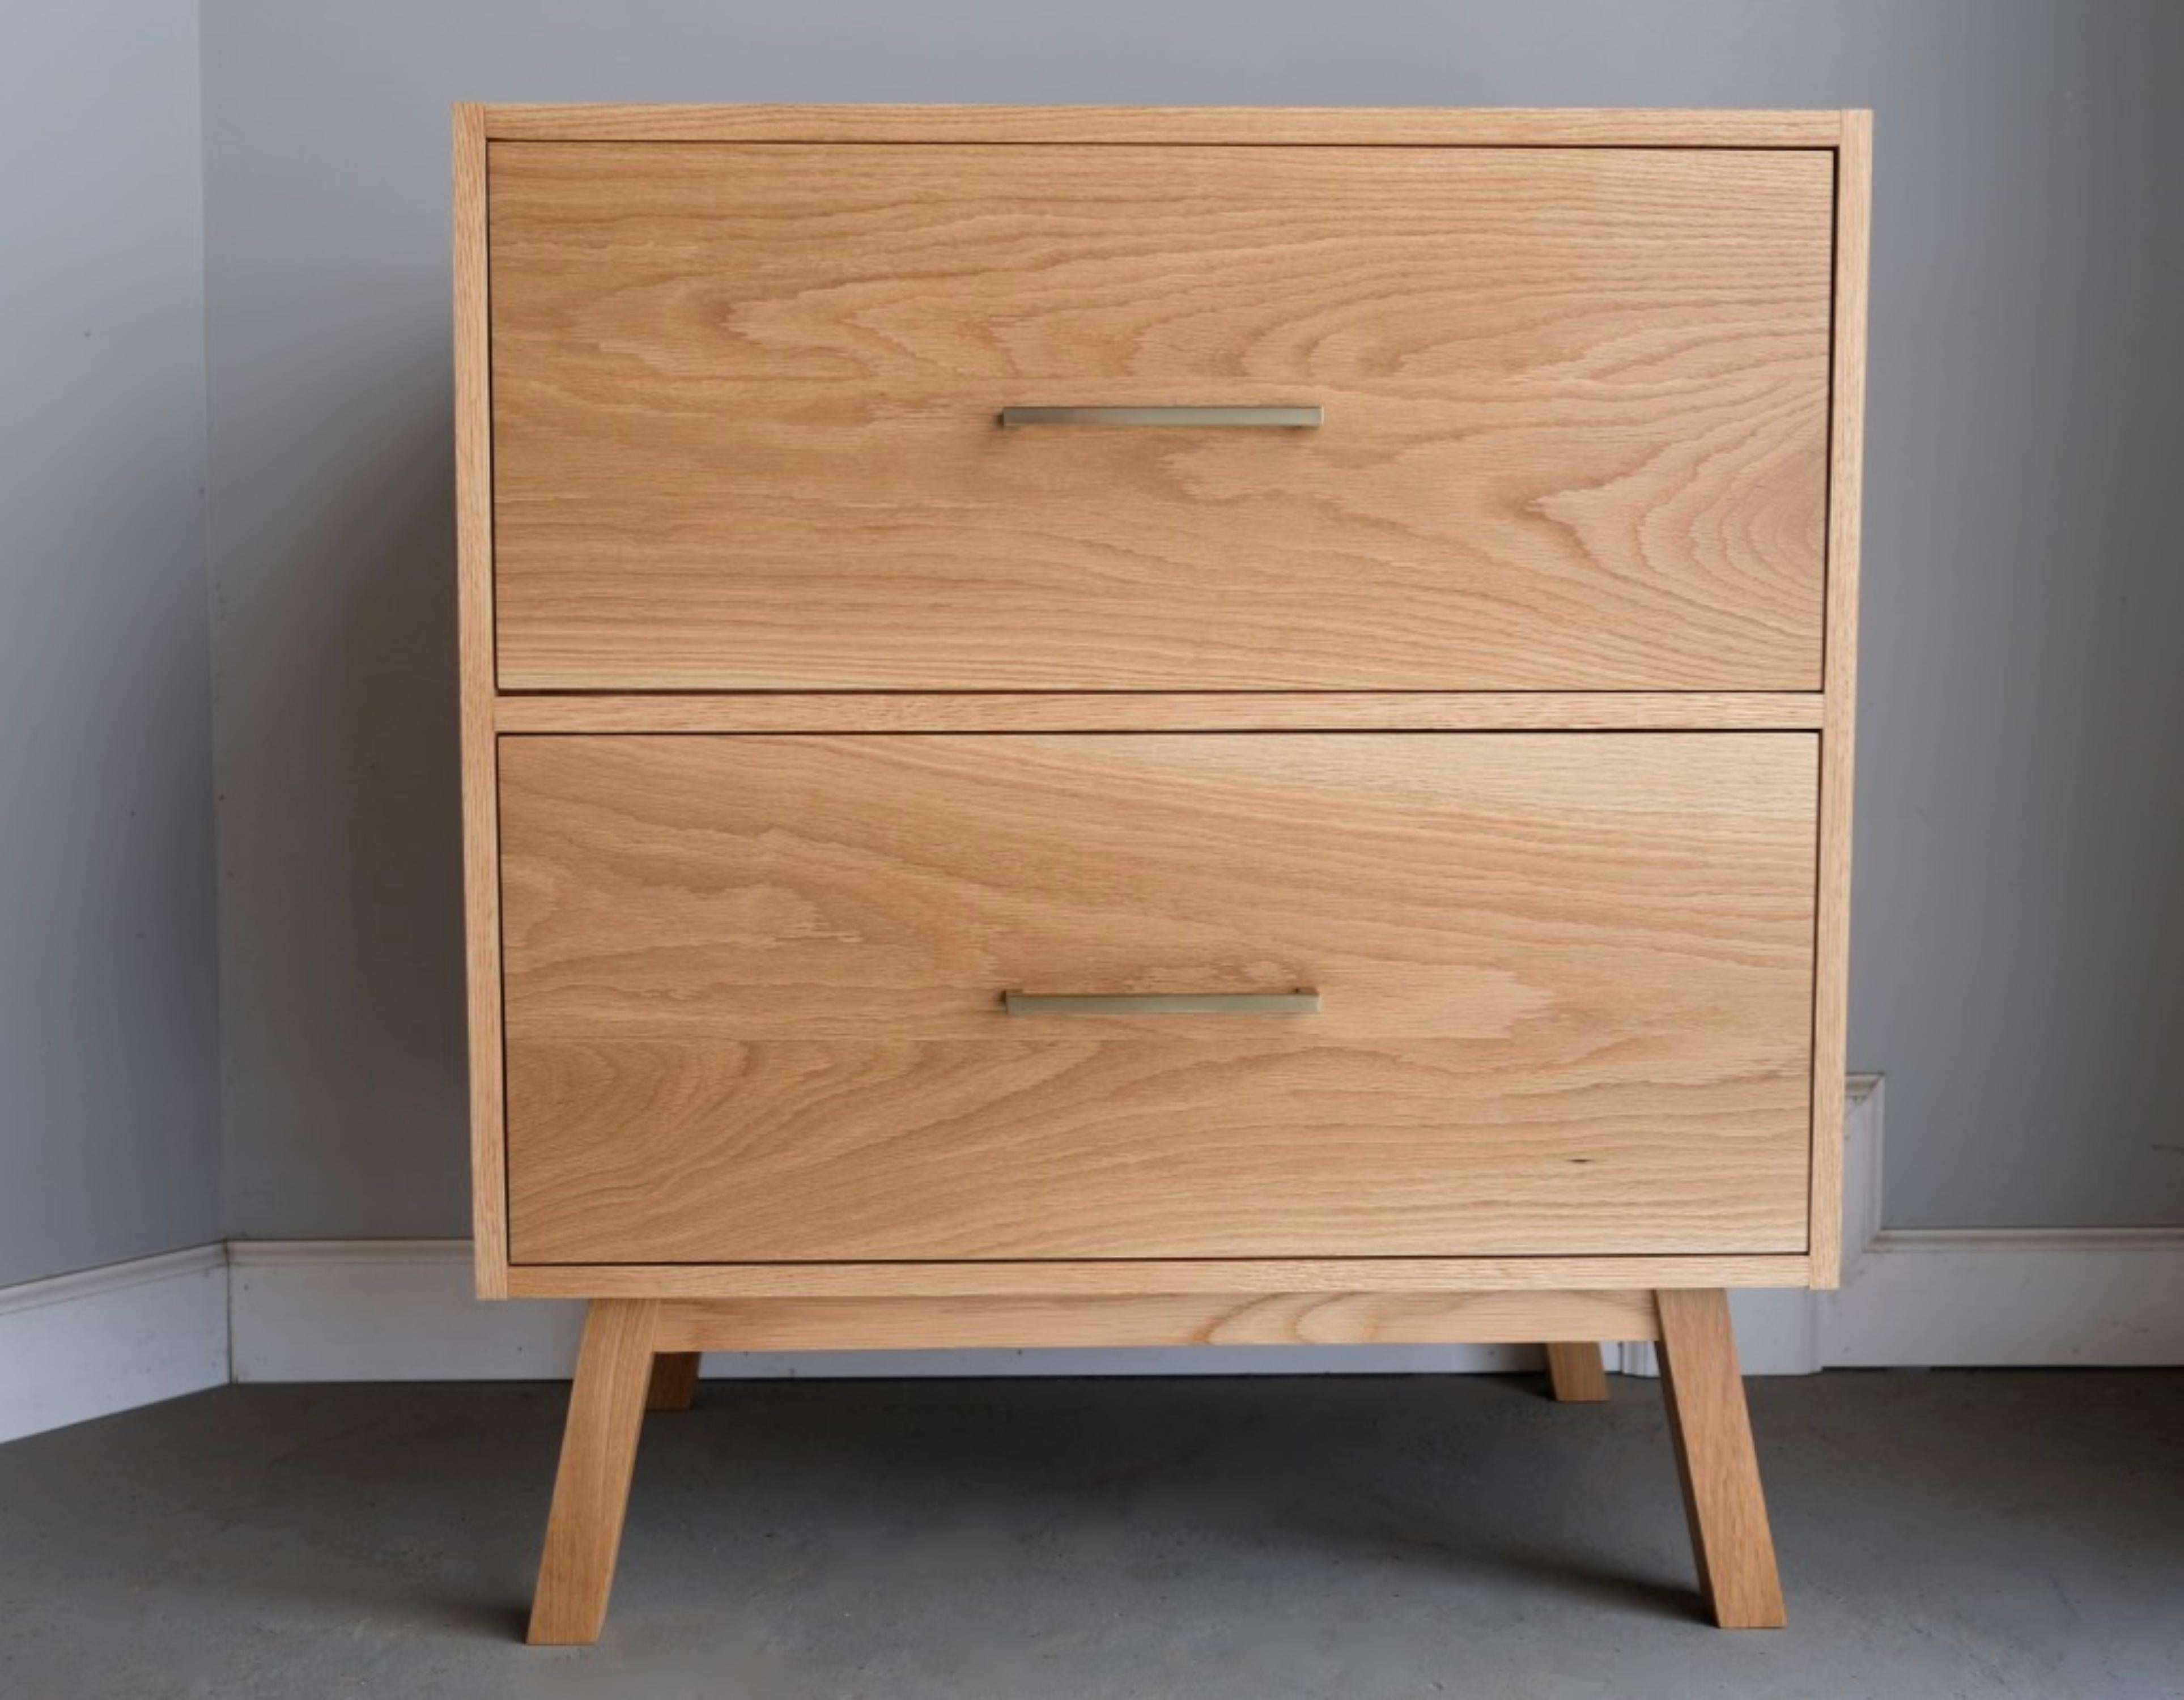 This nightstand features a solid hardwood case with a minimal modern perimeter and two inset drawers. Handcrafted in our shop from locally sourced materials with traditional craftsmanship. The drawers are dovetailed with soft close blum slides and